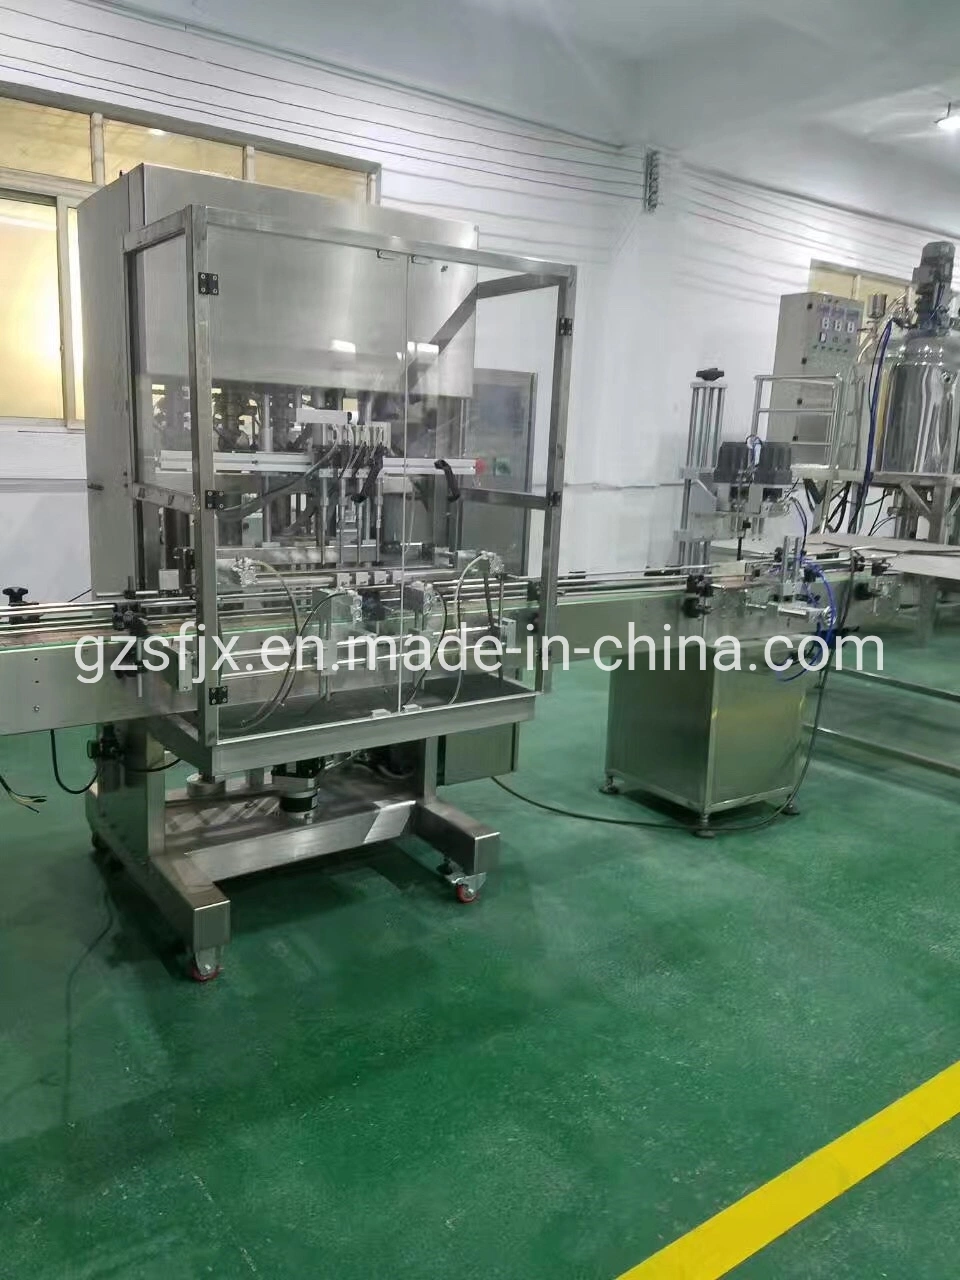 Liquid Cream Oil Lotion Sanitizer Honey Sauce Butter Paint Ink Ghee Syrup Machine From Guangzhou